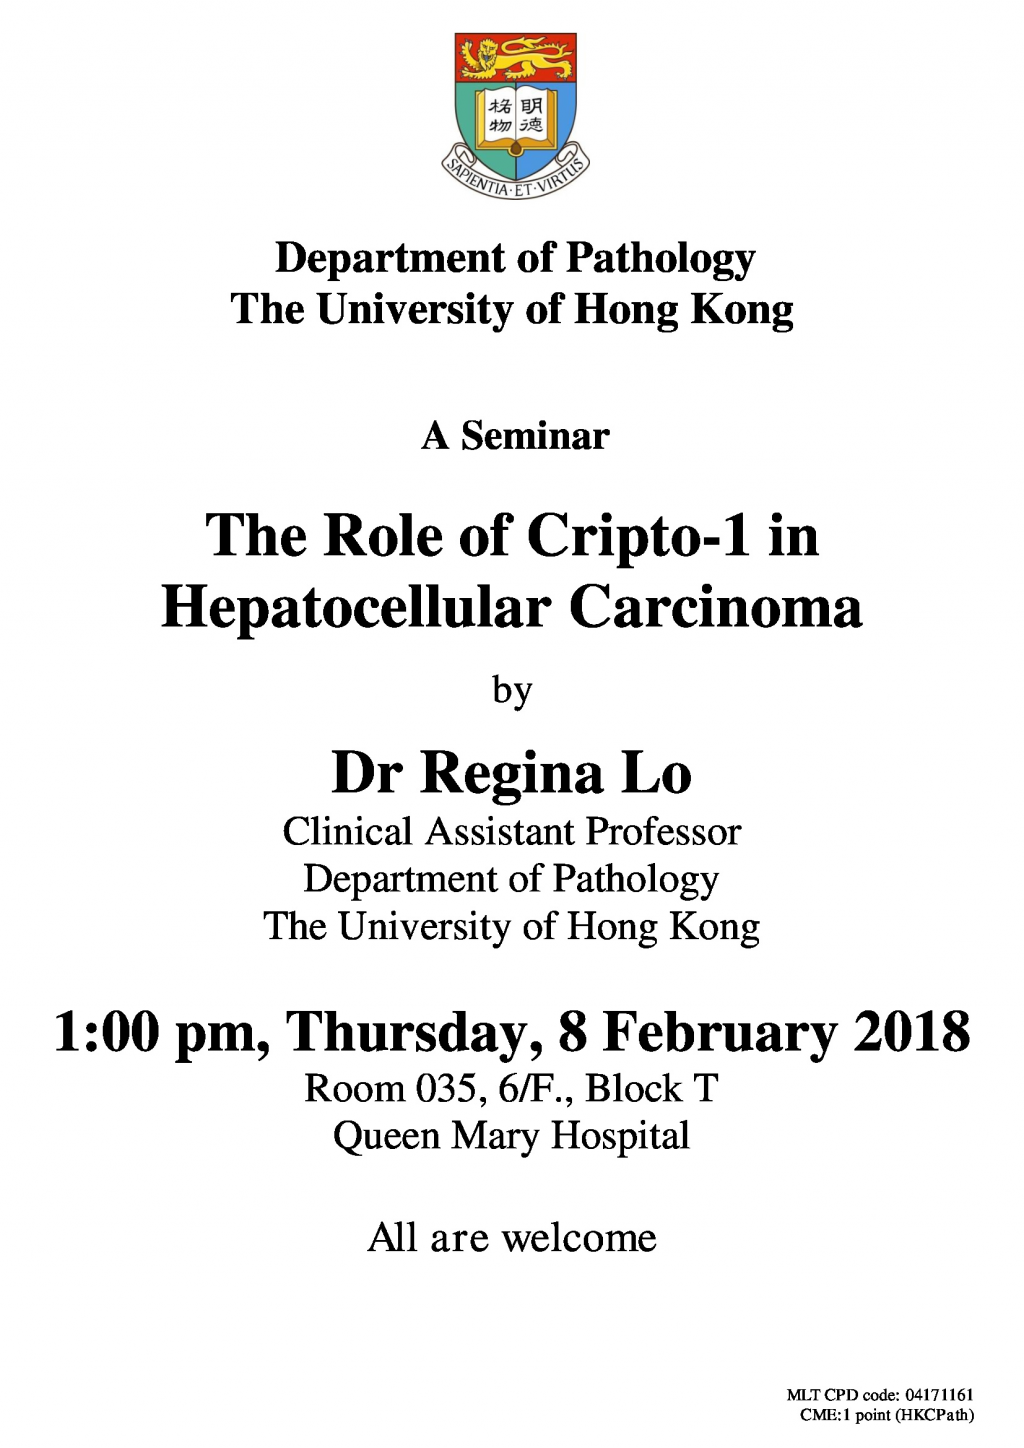 A Seminar on The Role of Cripto-1 in Hepatocellular Carcinoma by Dr Regina Lo on Feb 8 (1 pm)